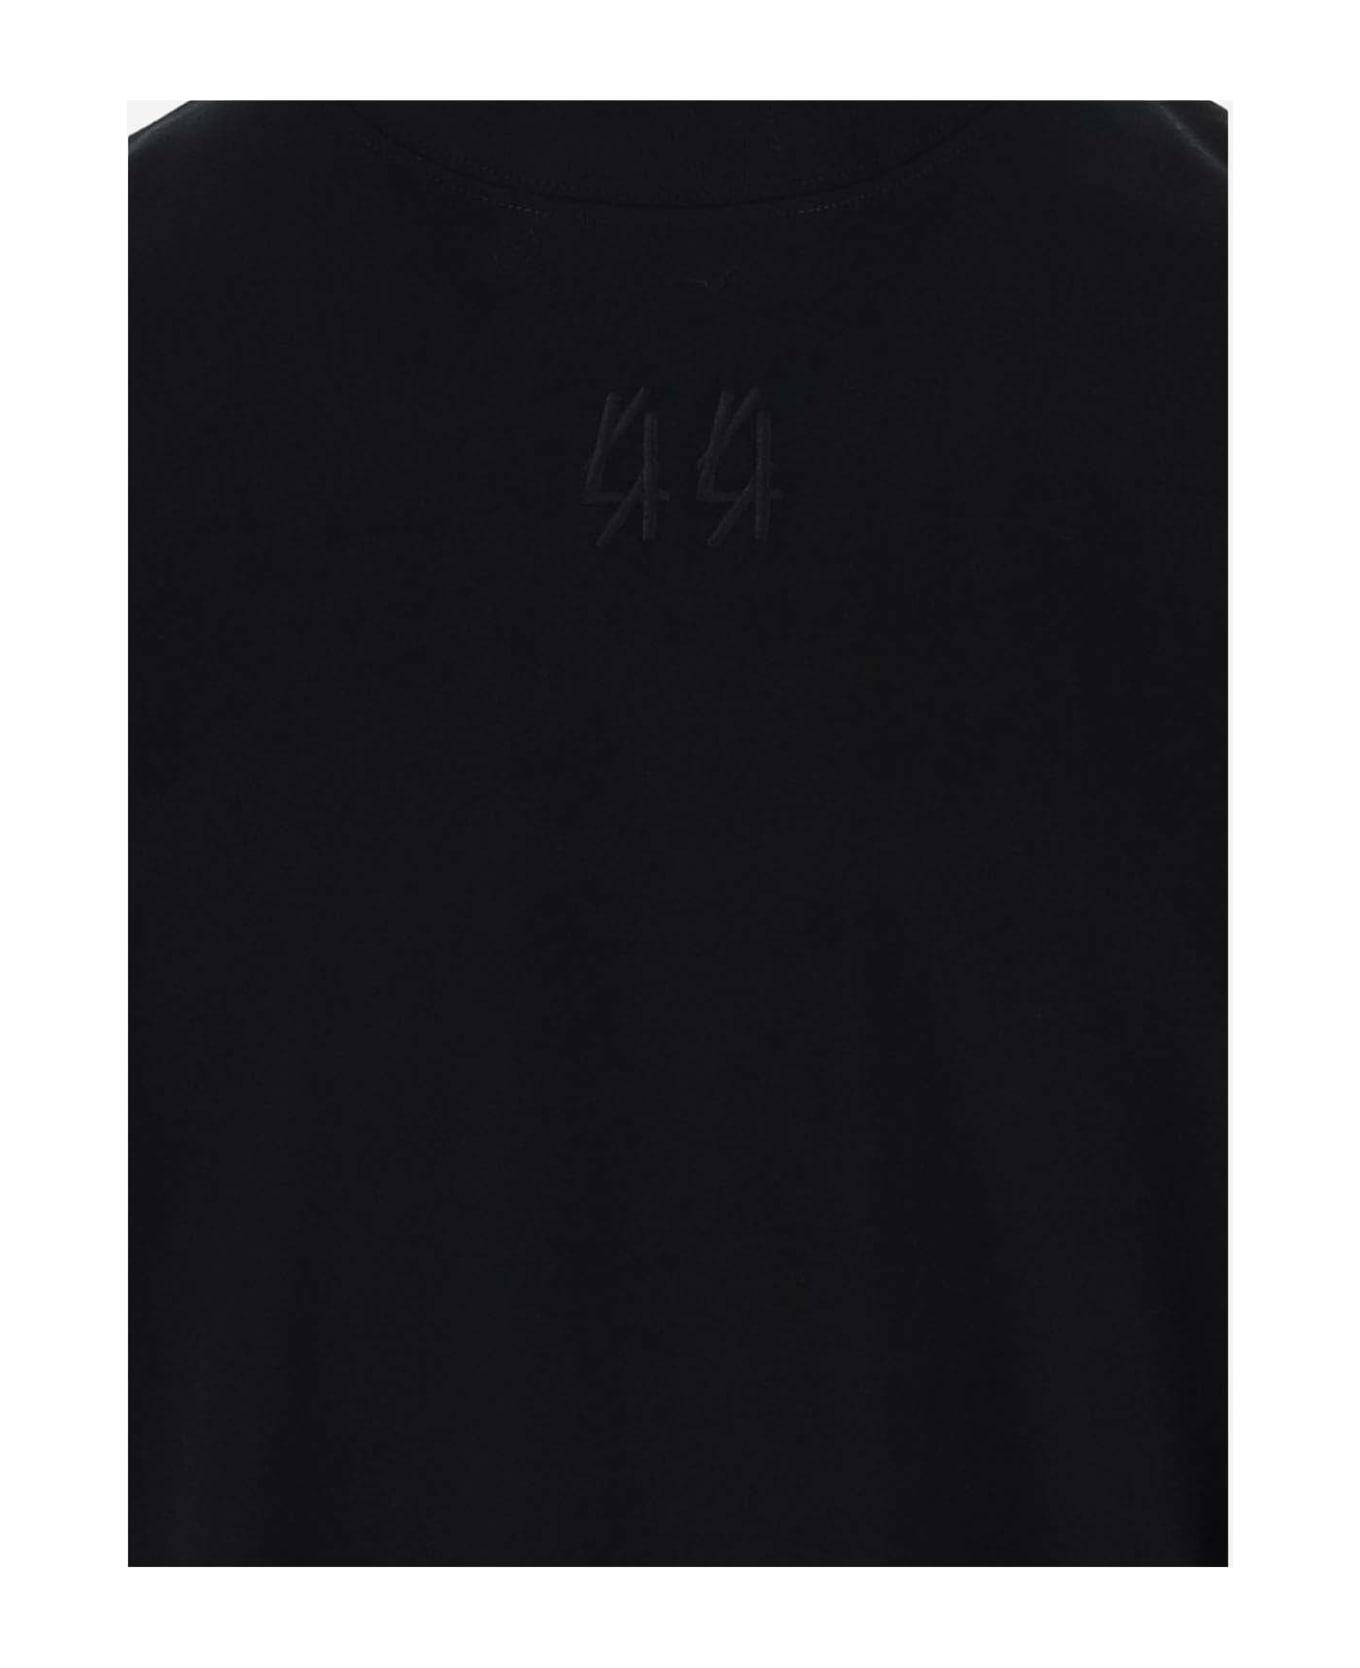 44 Label Group Cotton T-shirt With Logo - Nero